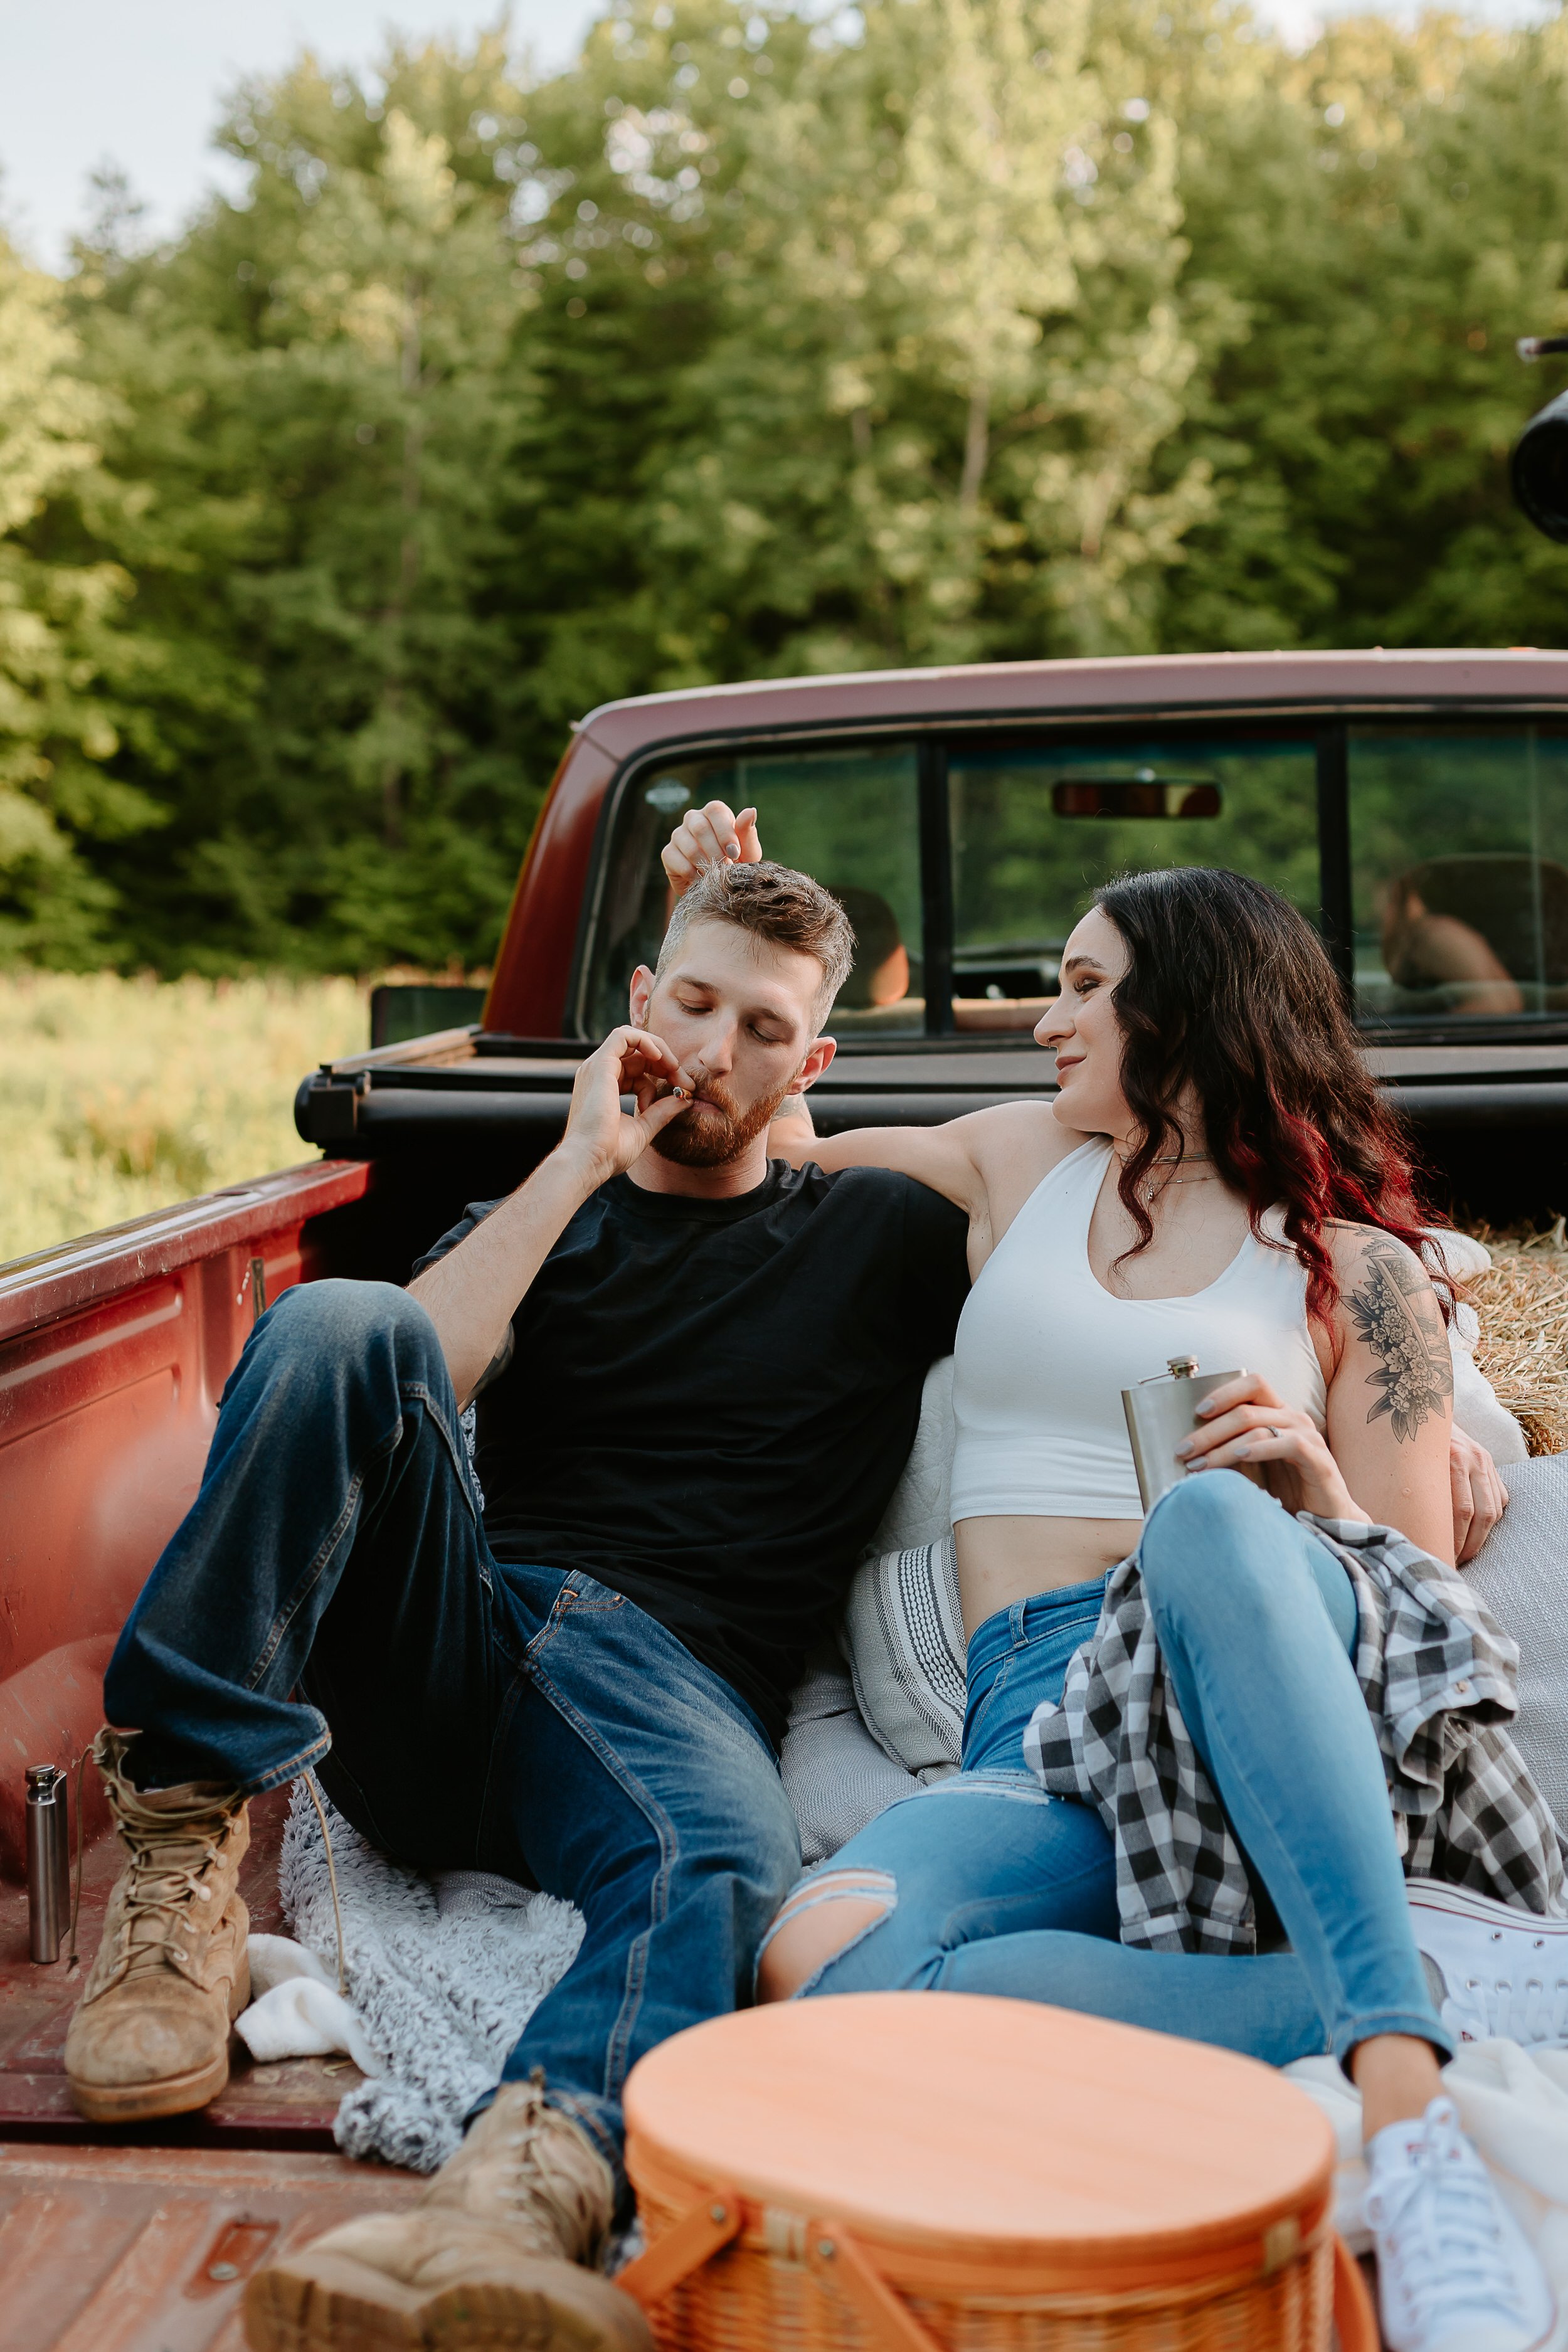 Man smokes joint while woman sits next to him in the bed of a truck.